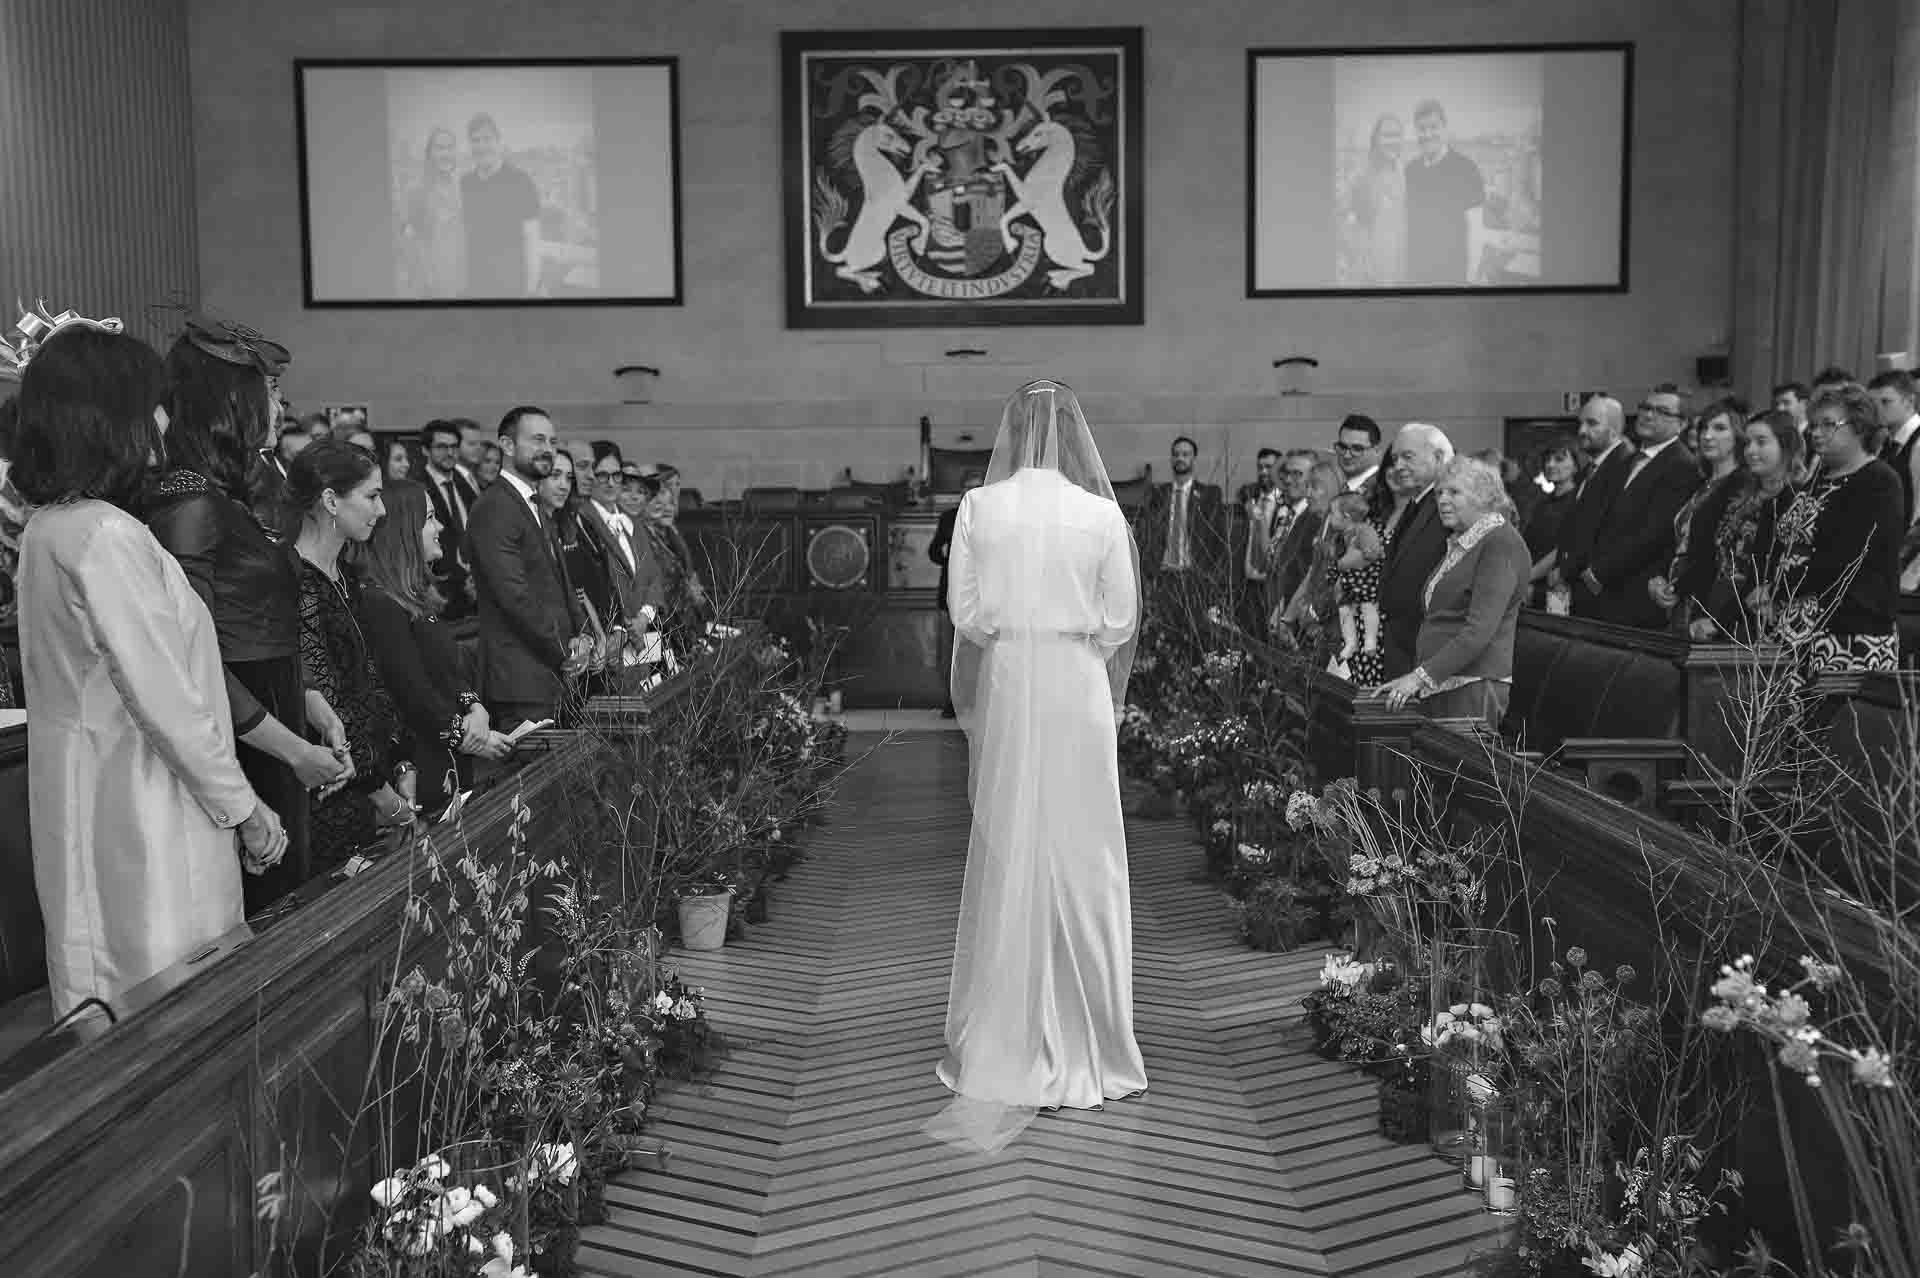 The bride walks down the aisle of the Council Chamber at Bristol City Hall